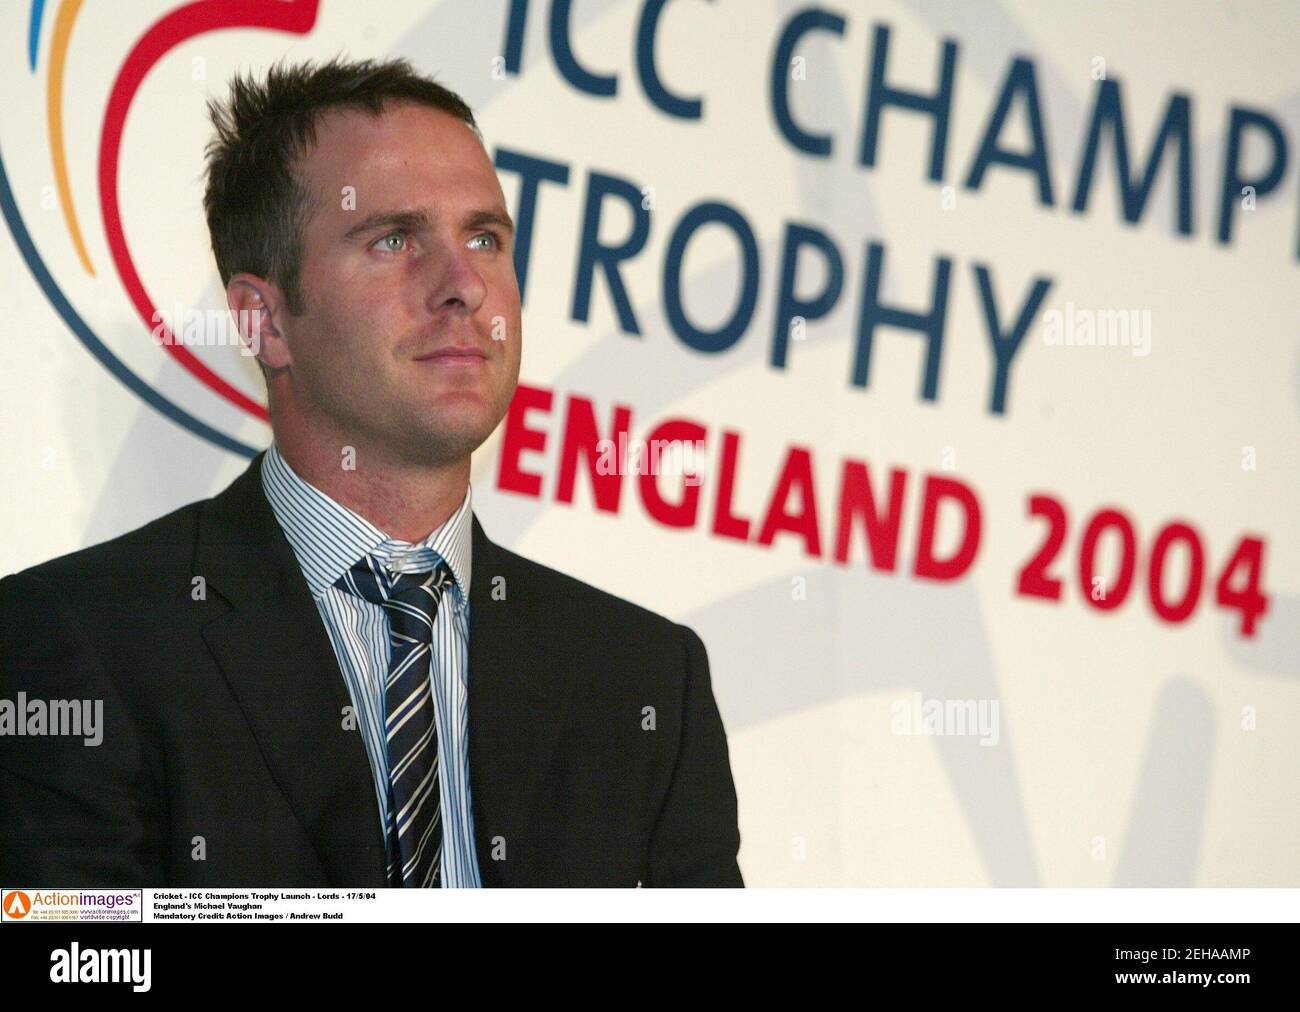 Cricket - ICC Champions Trophy Launch - Lord's  - 17/5/04  England's Michael Vaughan   Mandatory Credit: Action Images / Andrew Budd Stock Photo